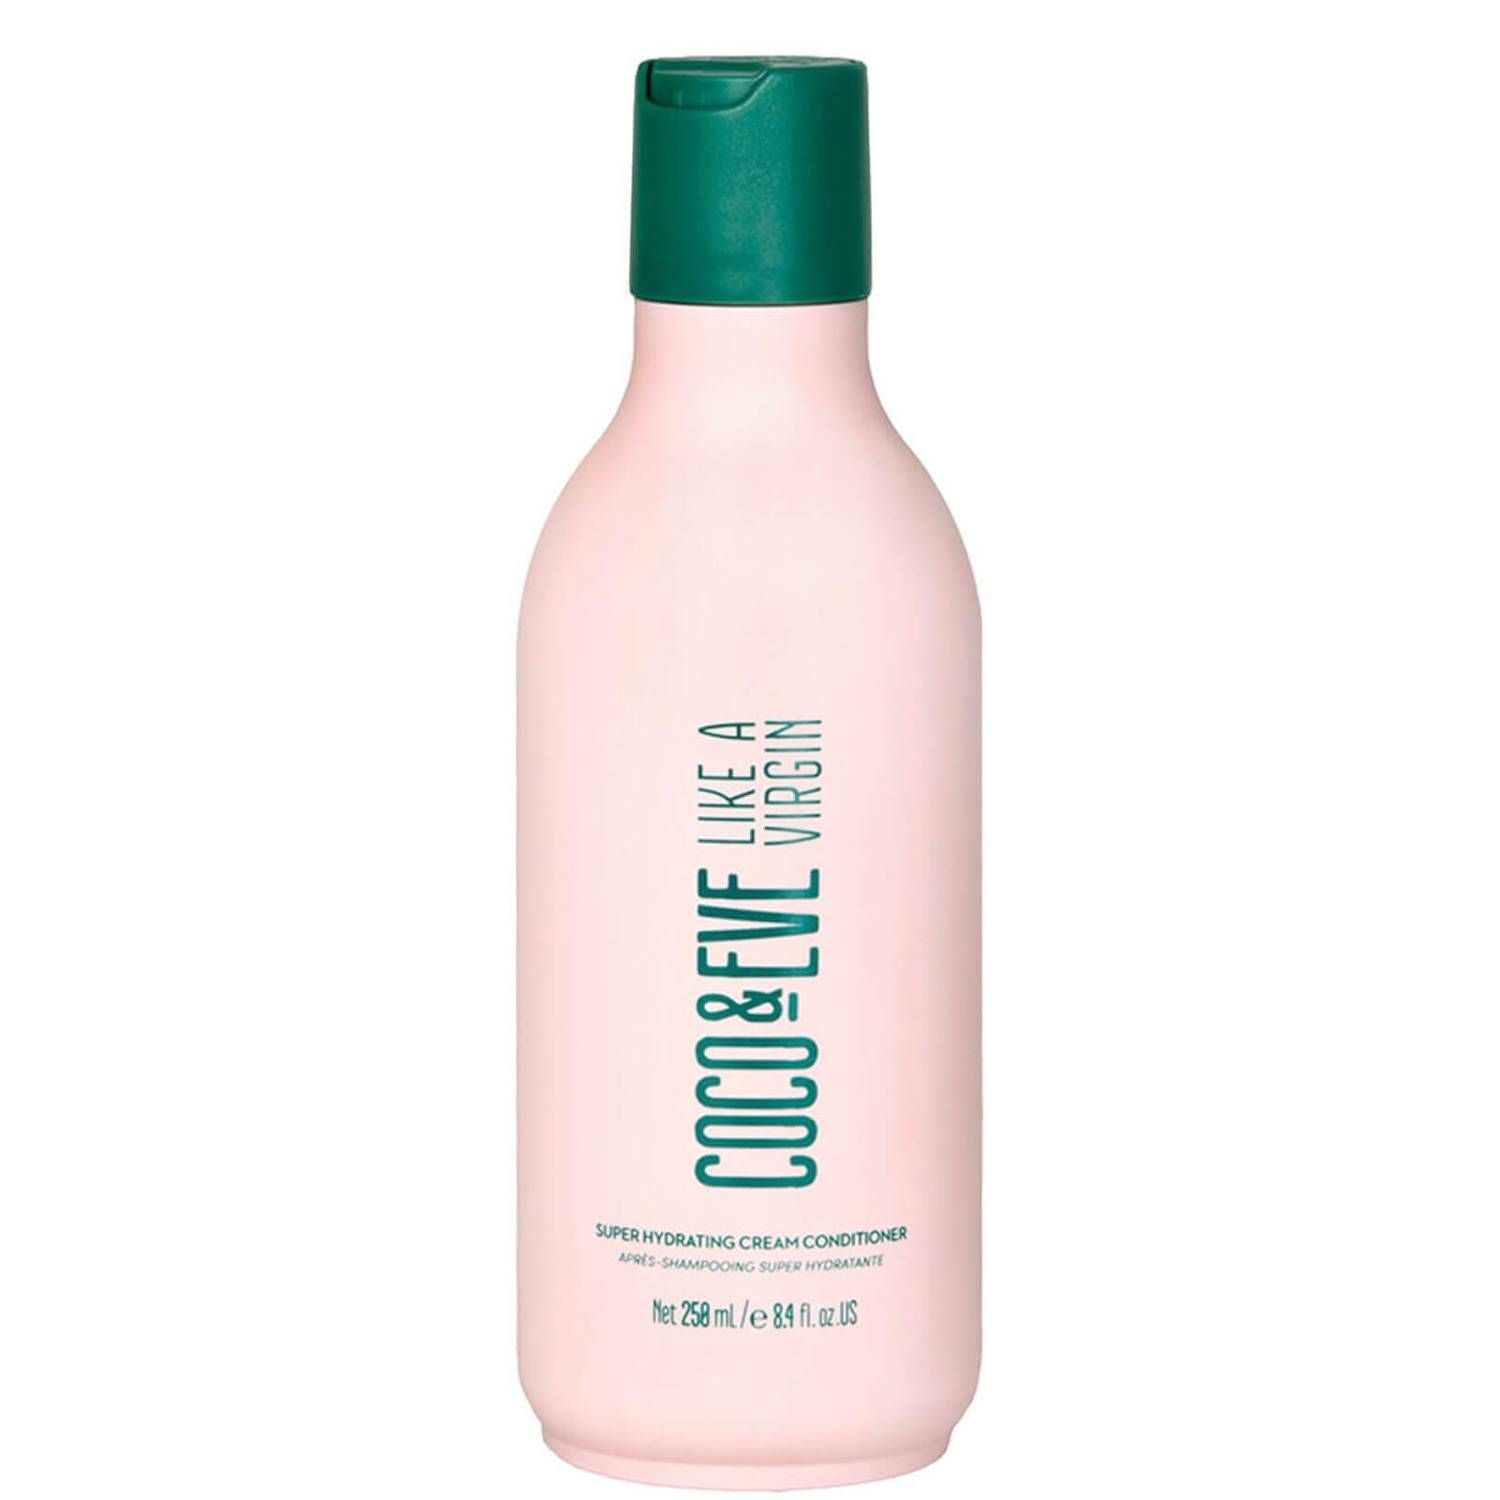 Coco & Eve Super Hydrating Conditioner 258ml | Cult Beauty